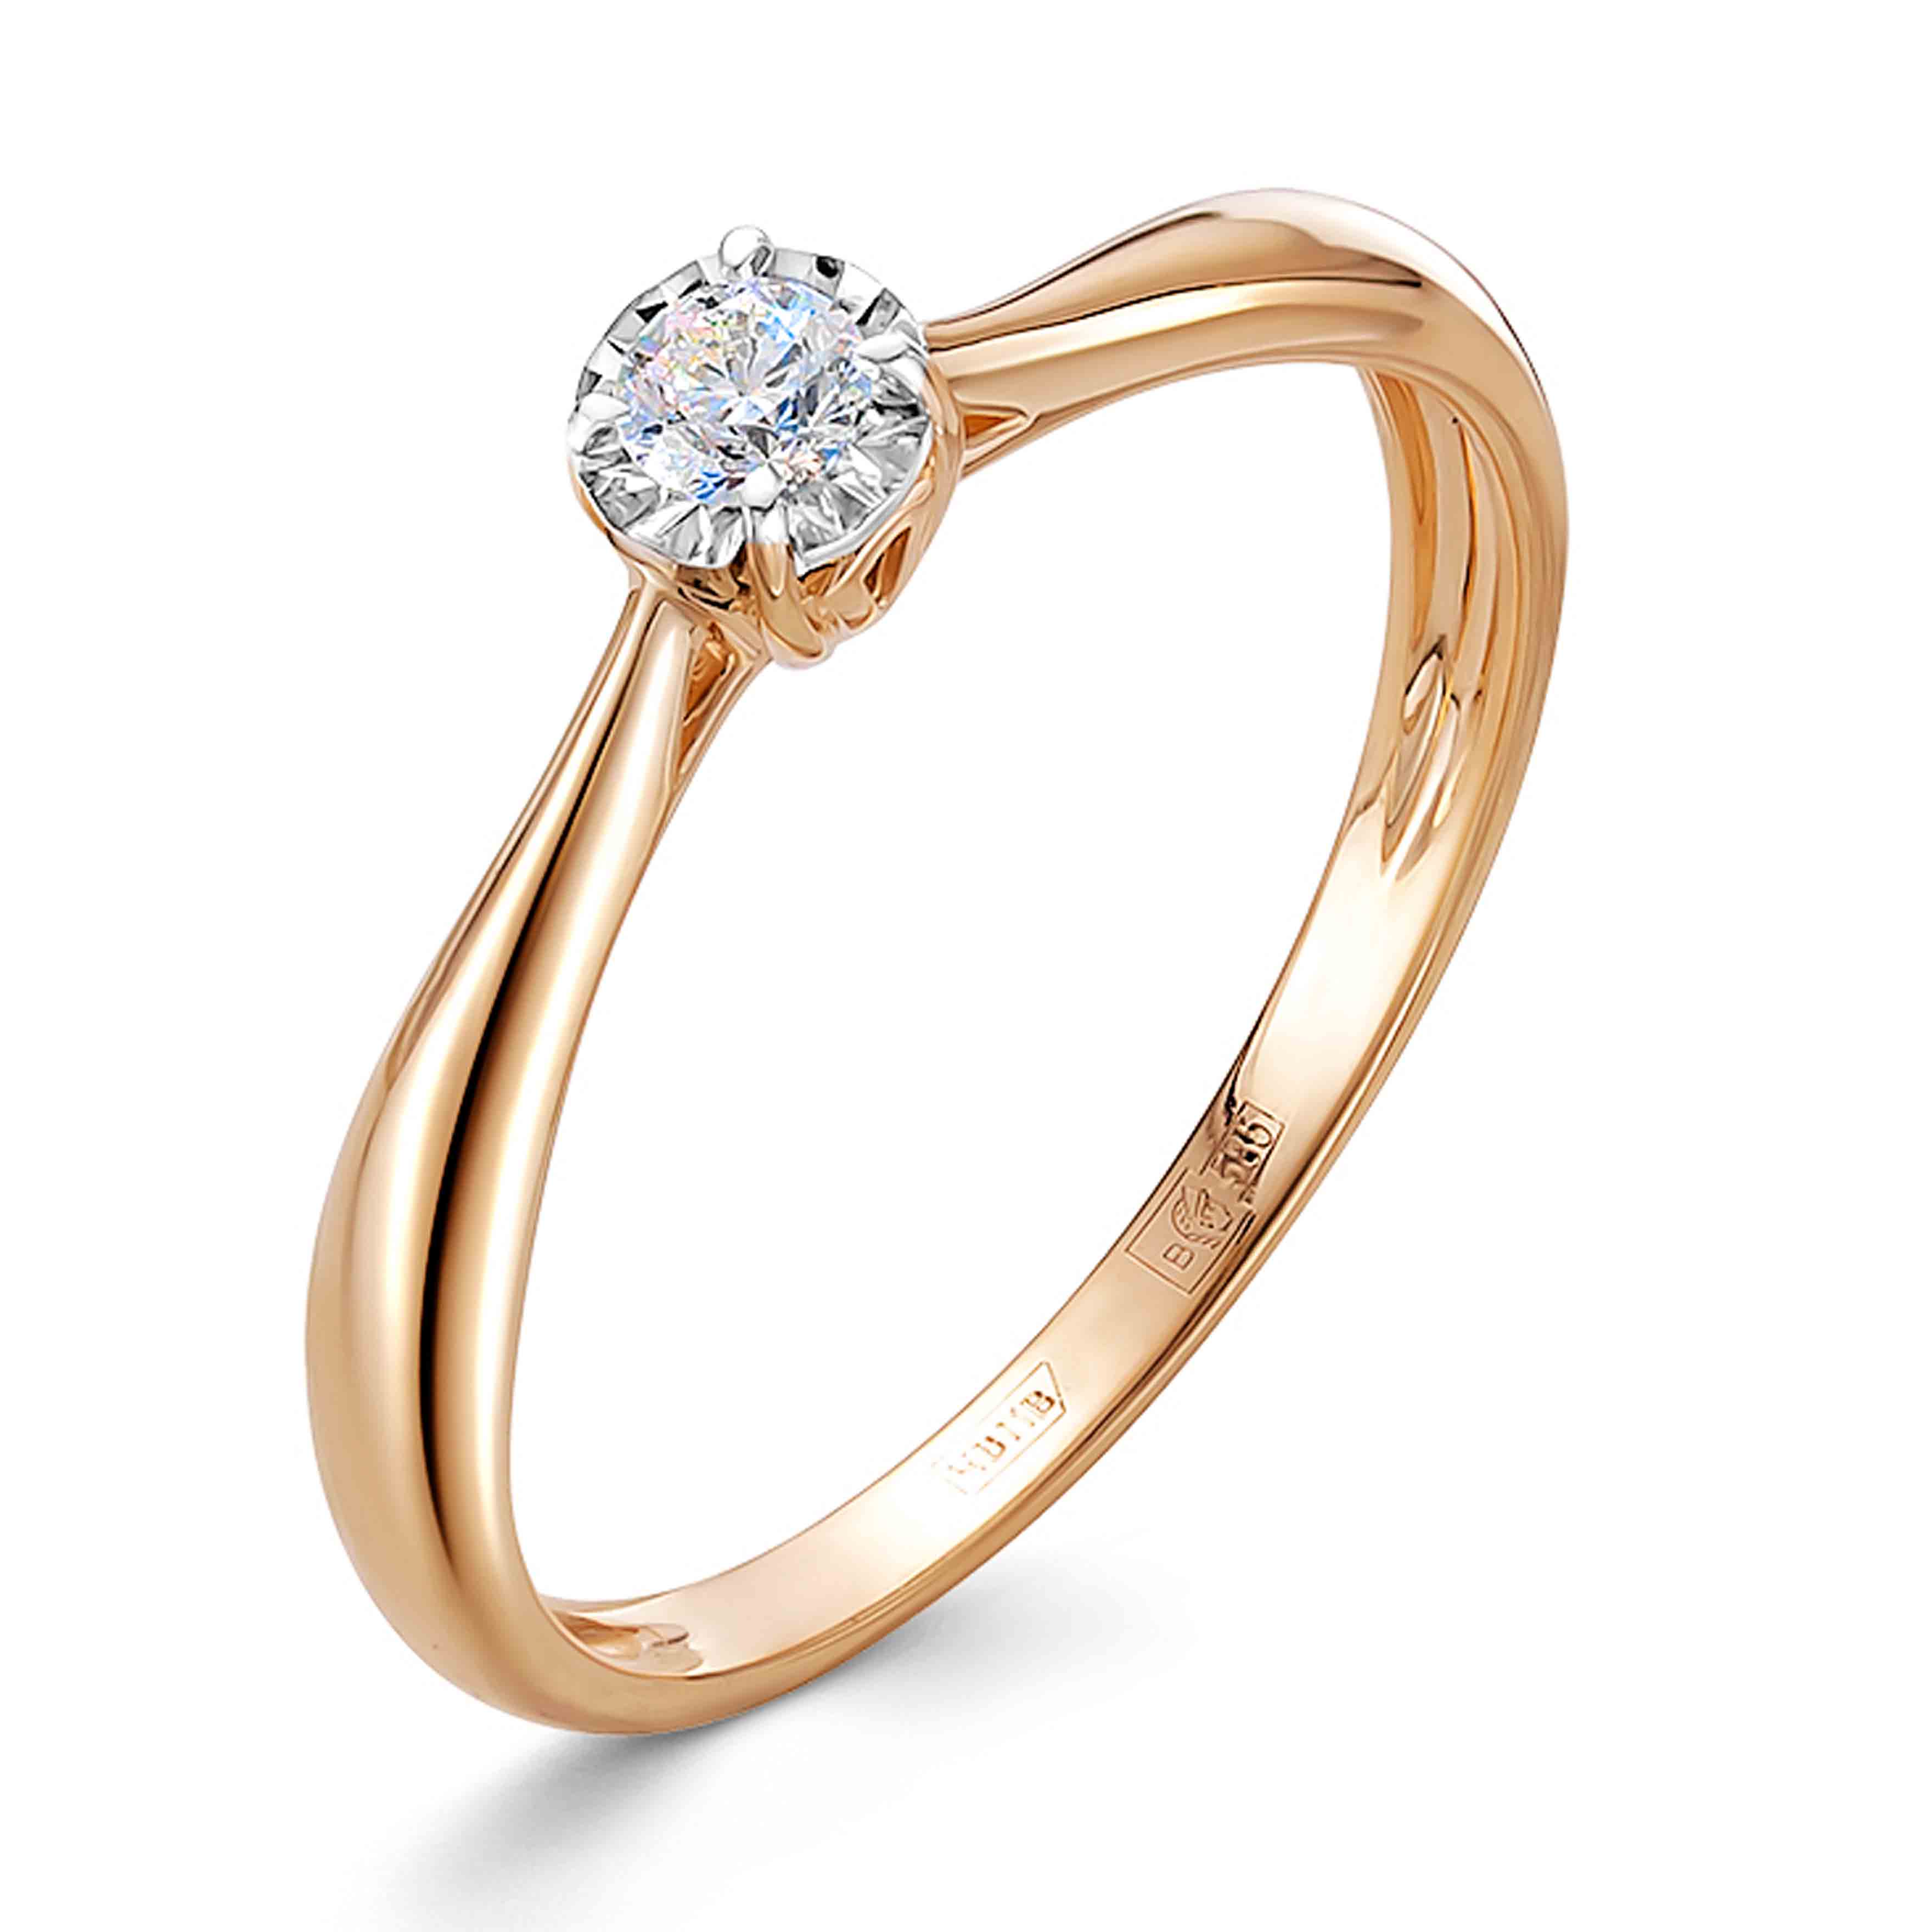 9ct White Gold Russian Wedding Ring - 2mm - R17542 | F.Hinds Jewellers